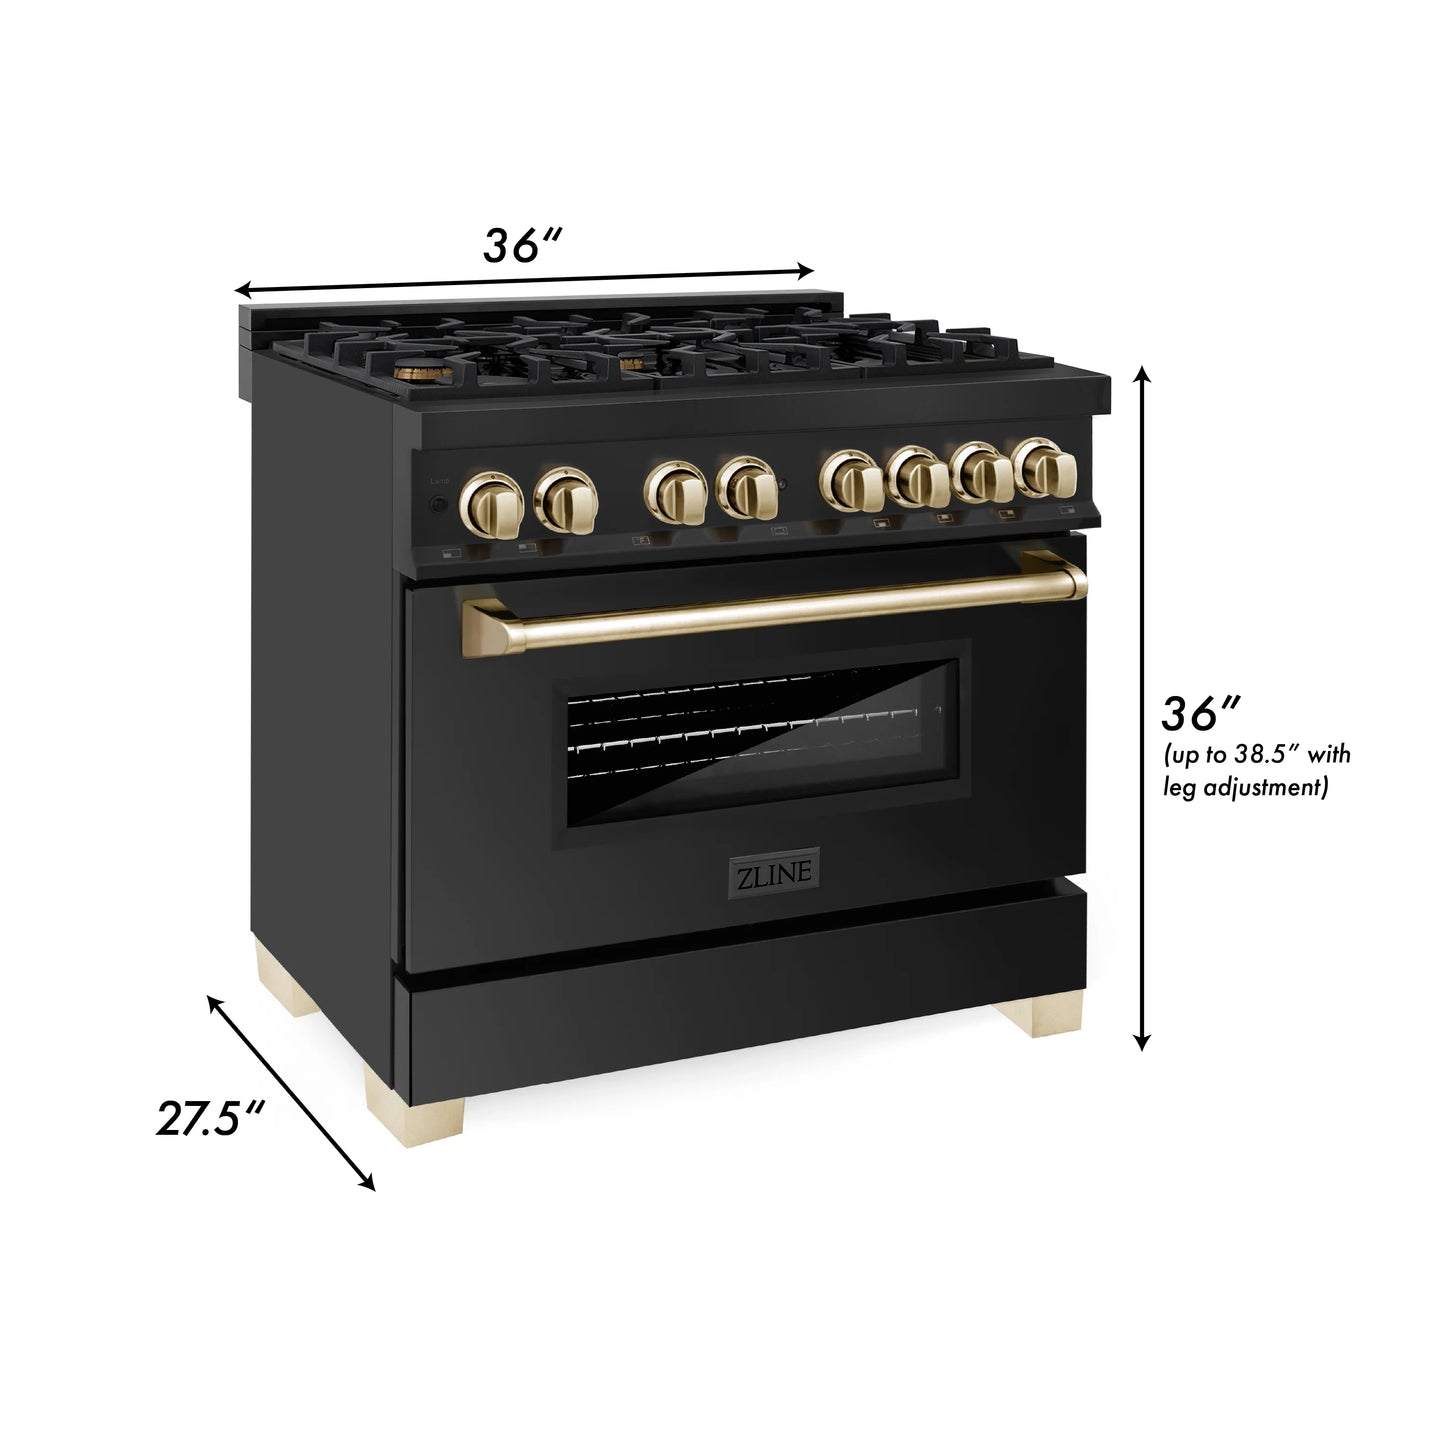 ZLINE Autograph Edition 36 in. Dual Fuel Range with Gas Stove and Electric Oven in Black Stainless Steel with Gold Accents (RABZ-36-G)